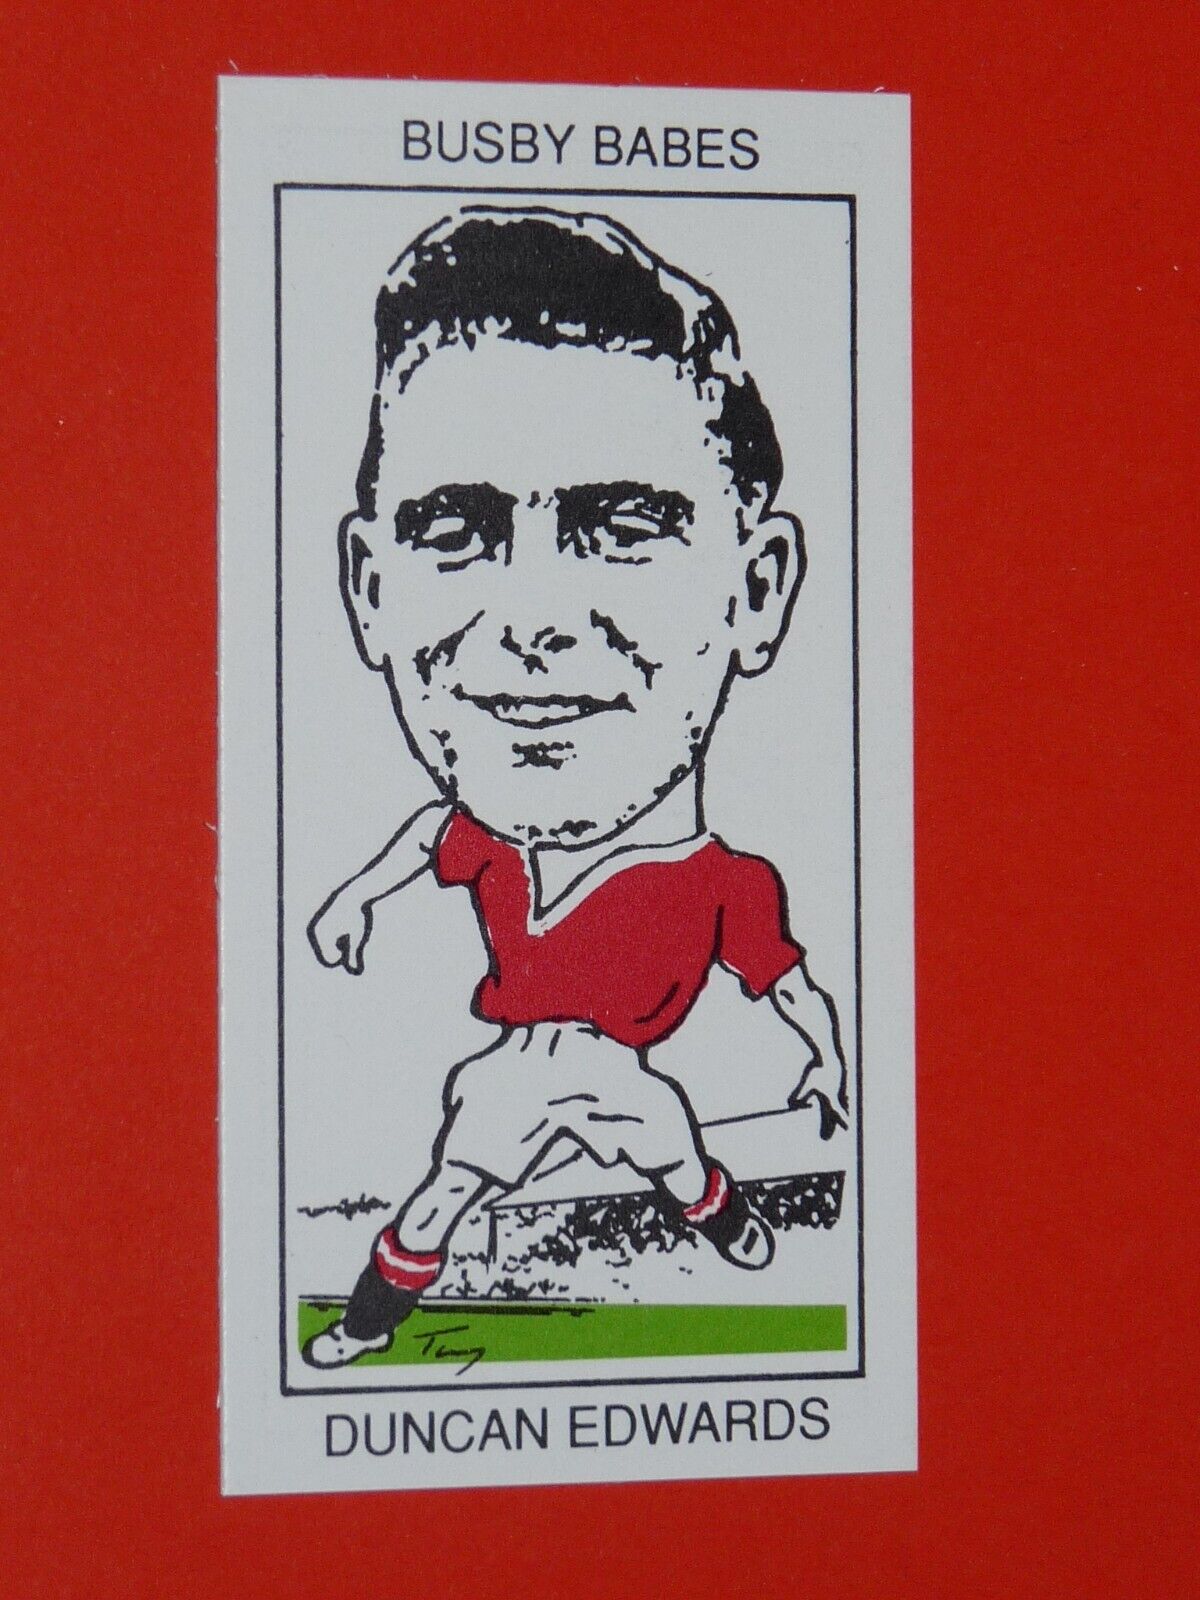 1990 WEST MIDLANDS CARD FOOTBALL MANCHESTER UNITED BUSBY BABES #9 DUNCAN EDWARDS